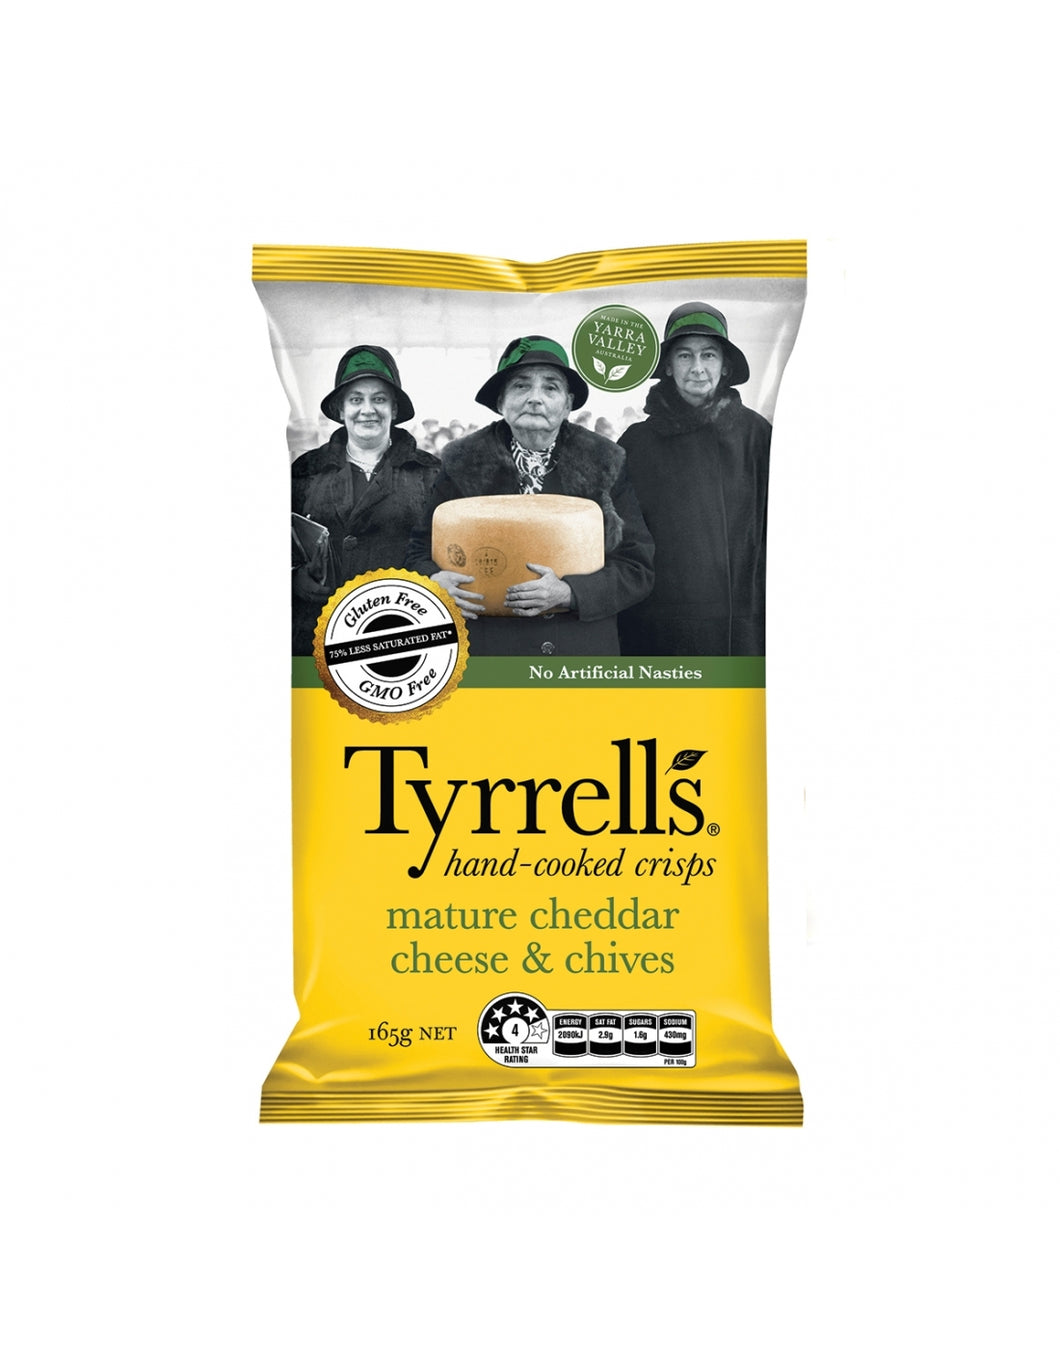 Tyrrells - Mature Cheddar Cheese & Chives 9 x 165g